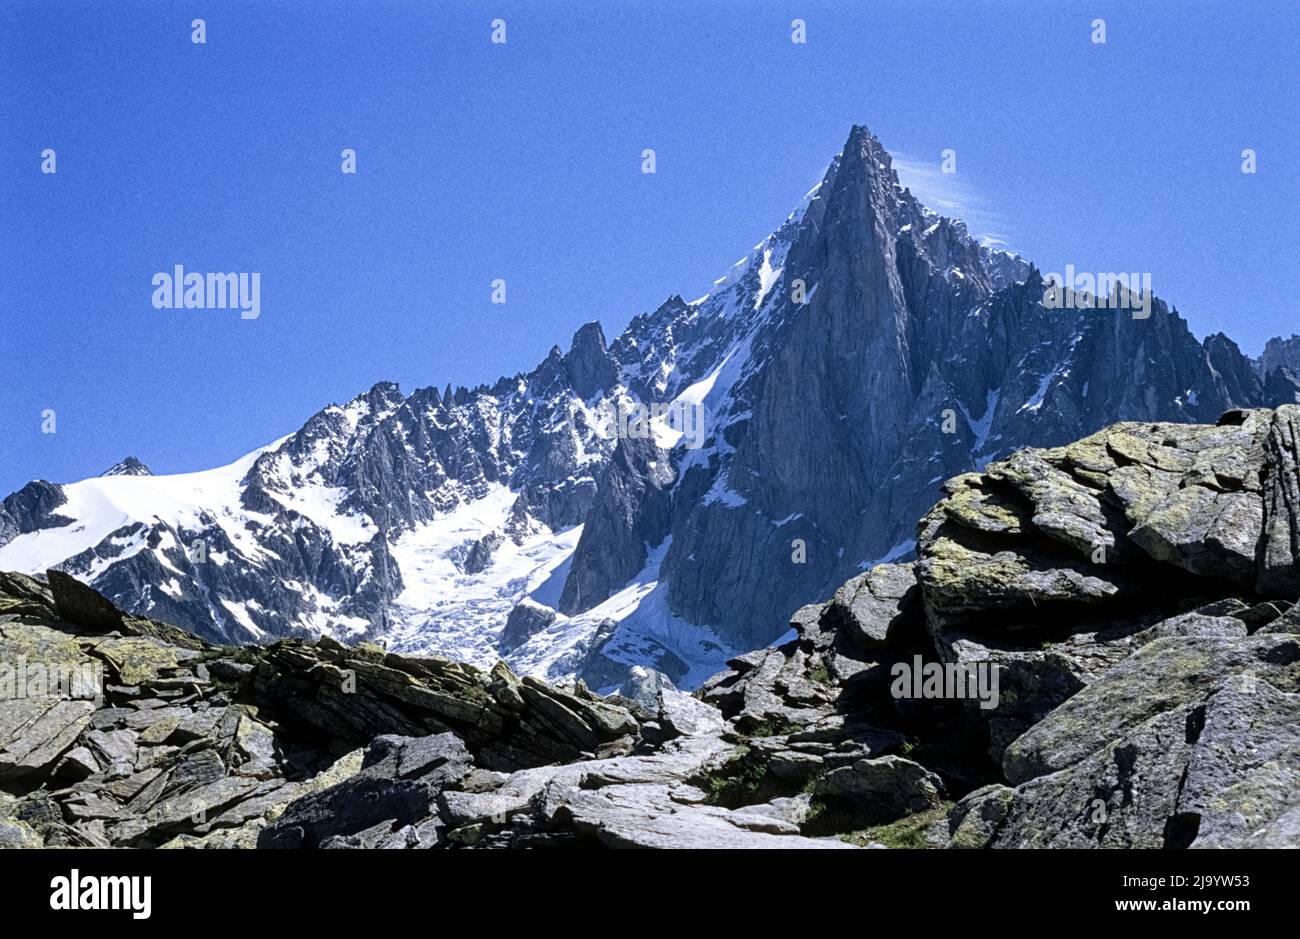 Aiguilles du Drus from the hiking trail from Plan d'Aiguille to Montenvers. There is a small veil of cloud around the peaks. Chamonix, France, 1990 Stock Photo